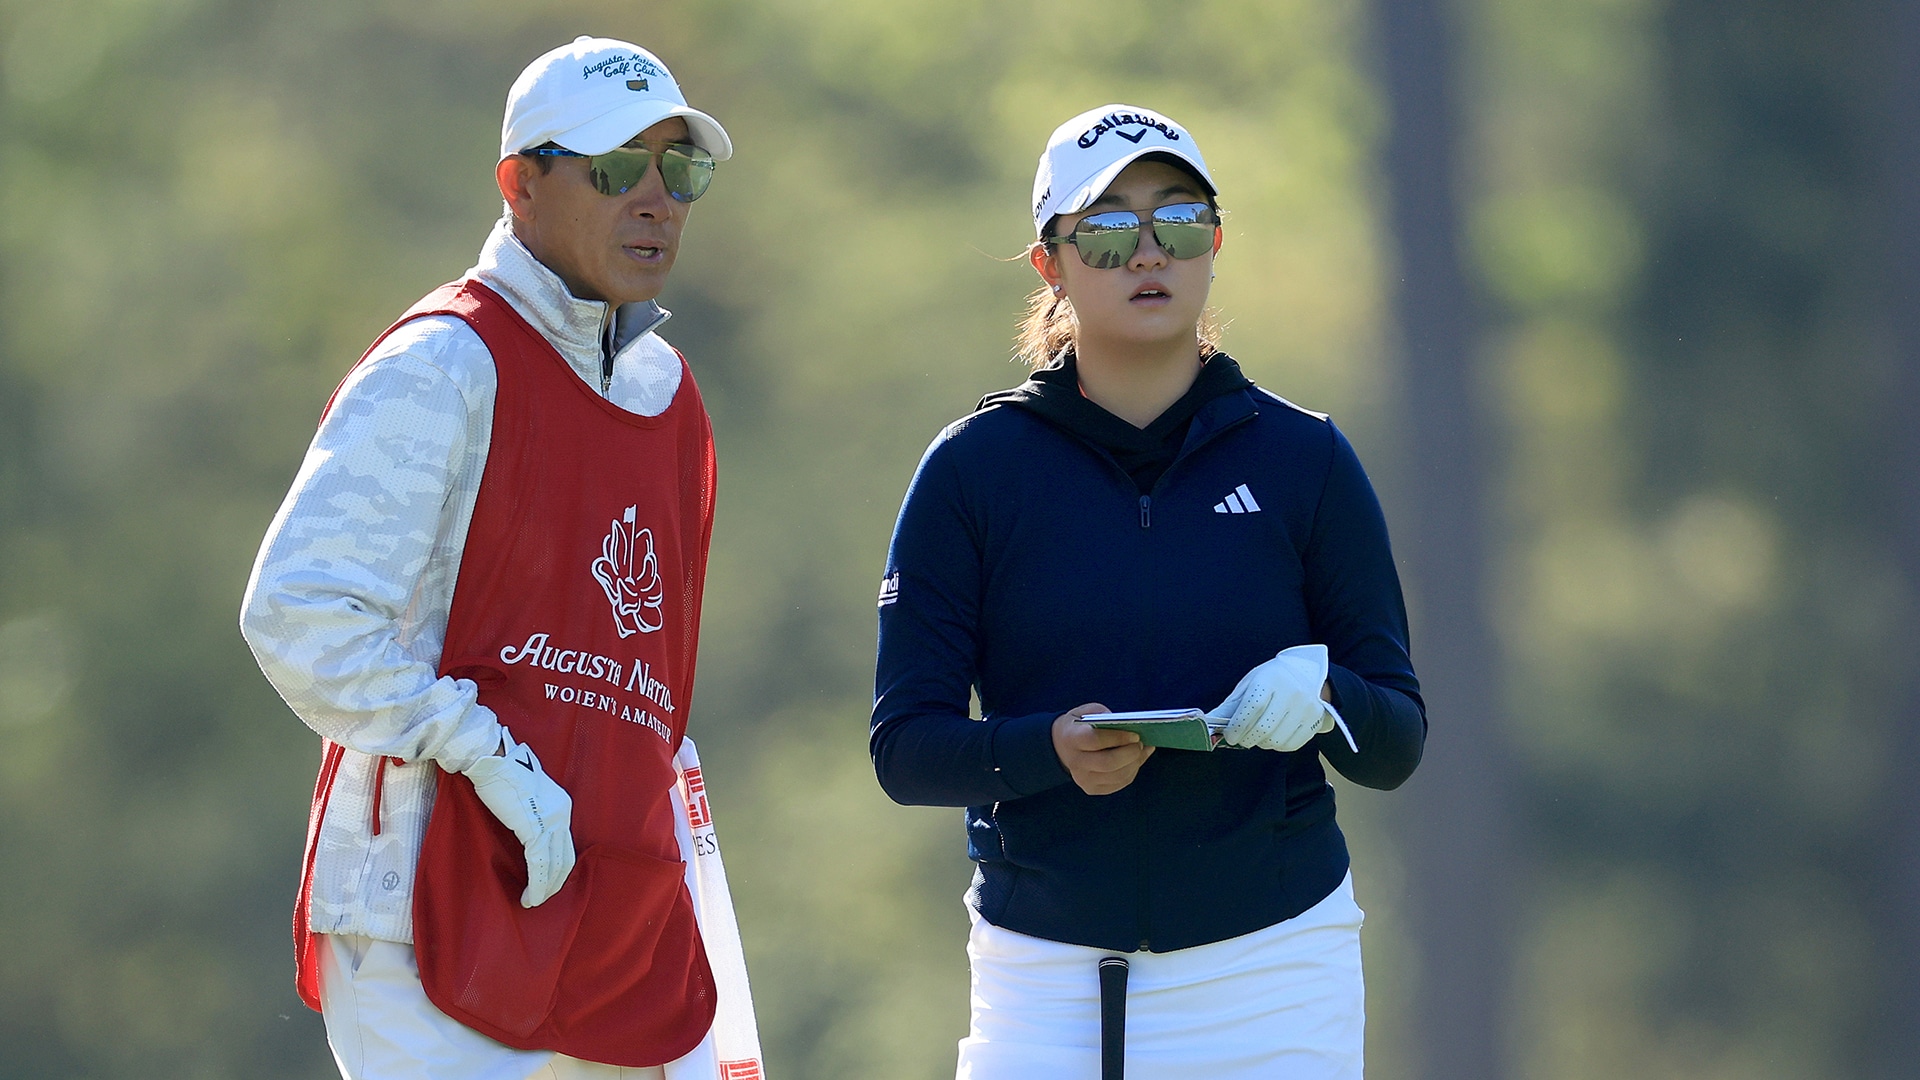 With five-shot lead, Rose Zhang sticking with father as caddie for final round at Augusta